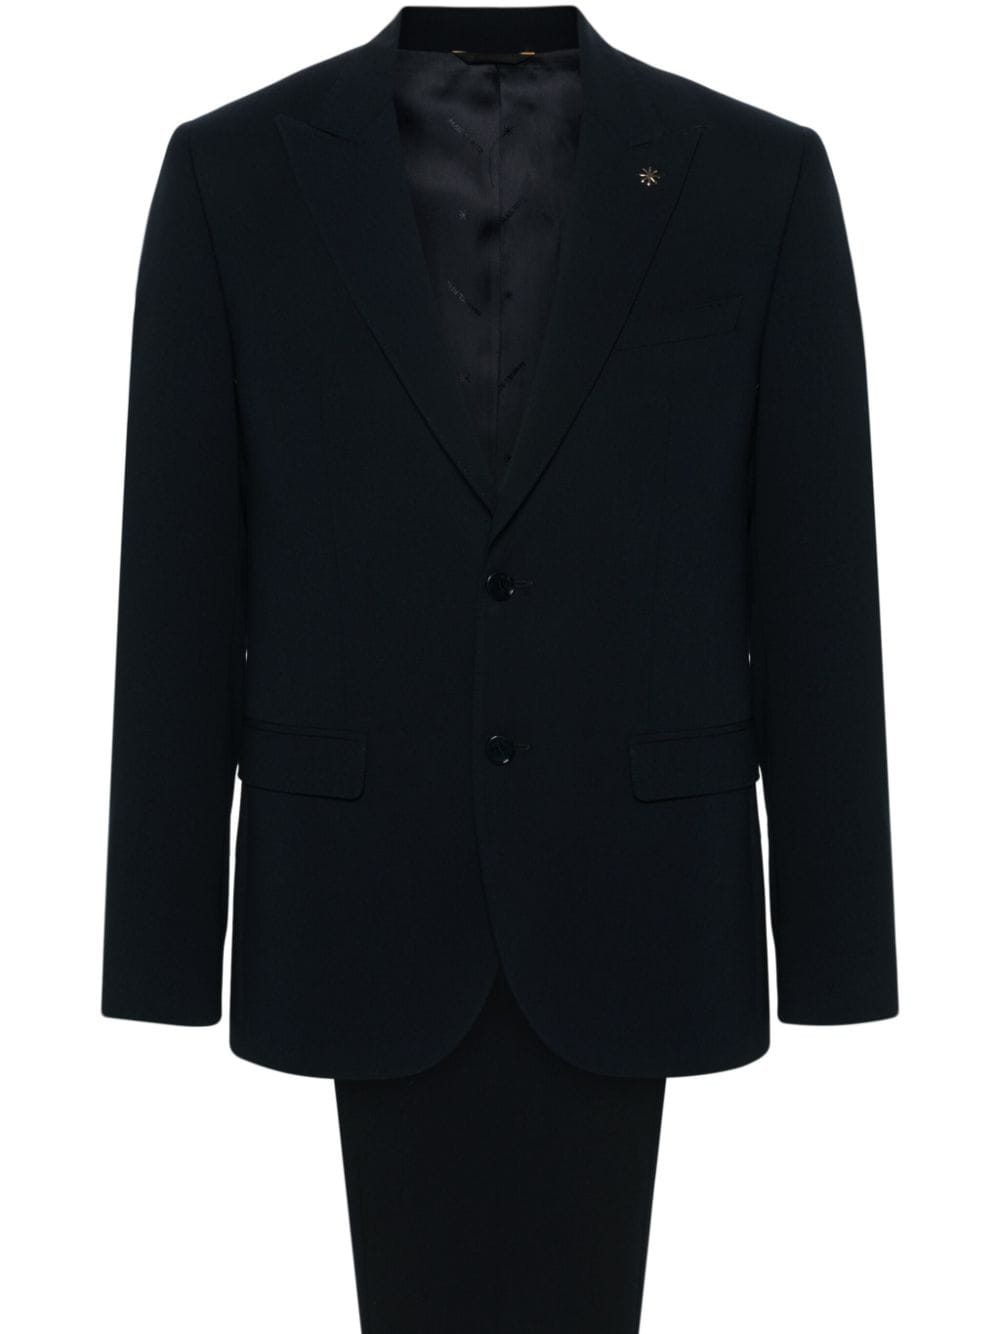 Stretch navy blue single-breasted suit